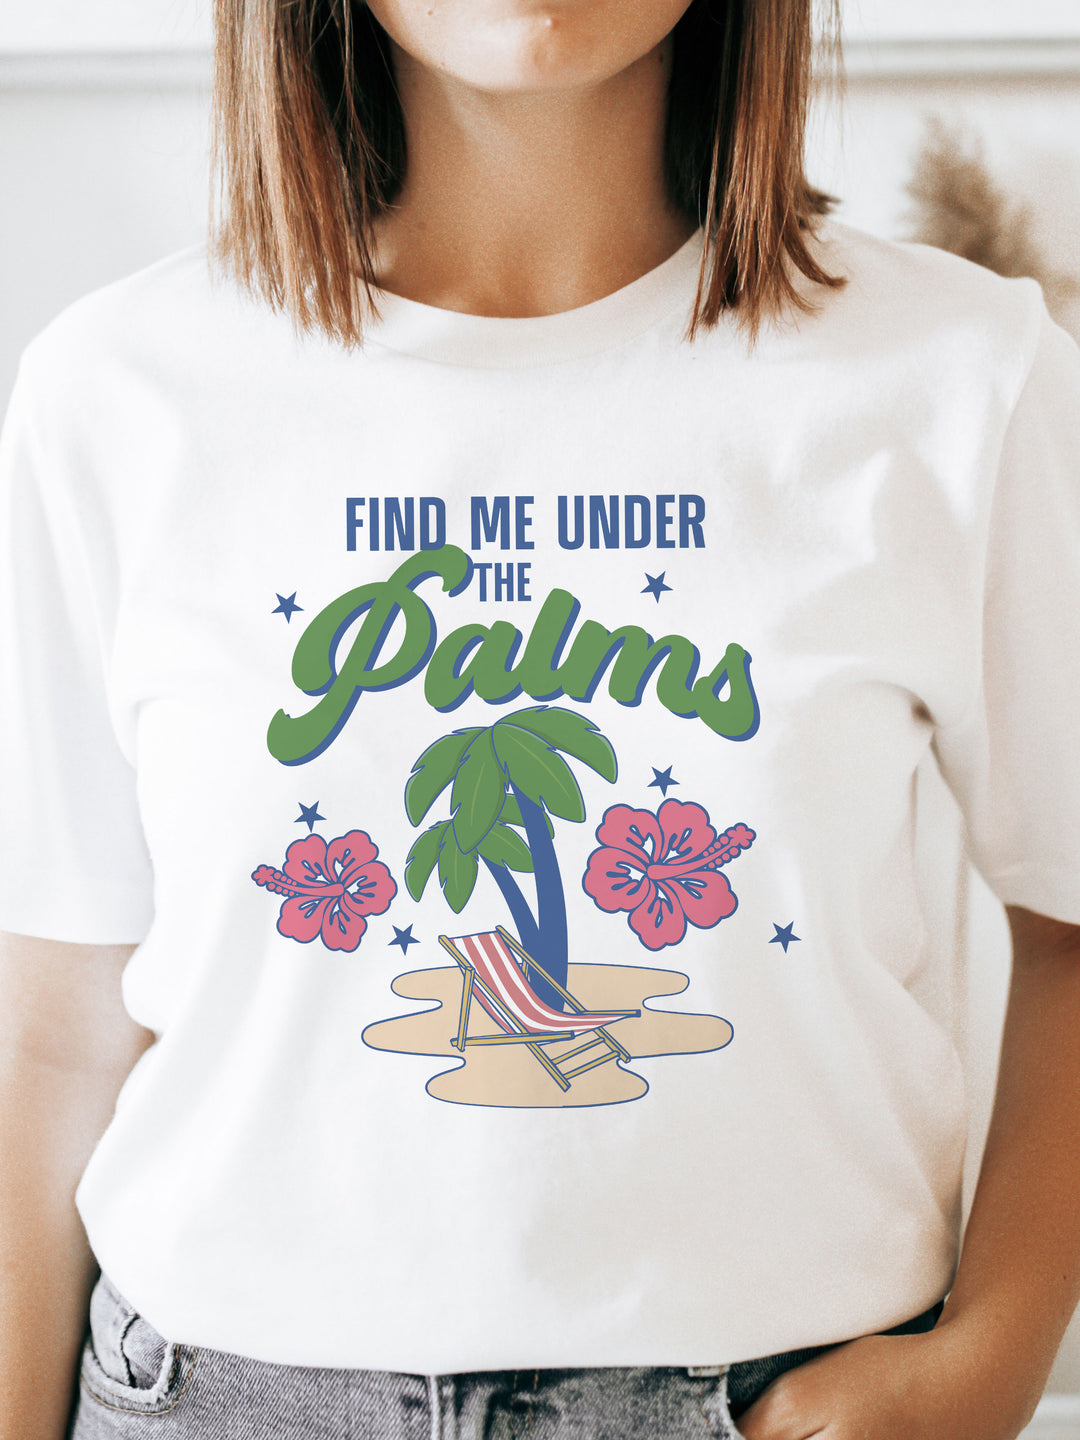 Find me under the Palms Graphic Tee